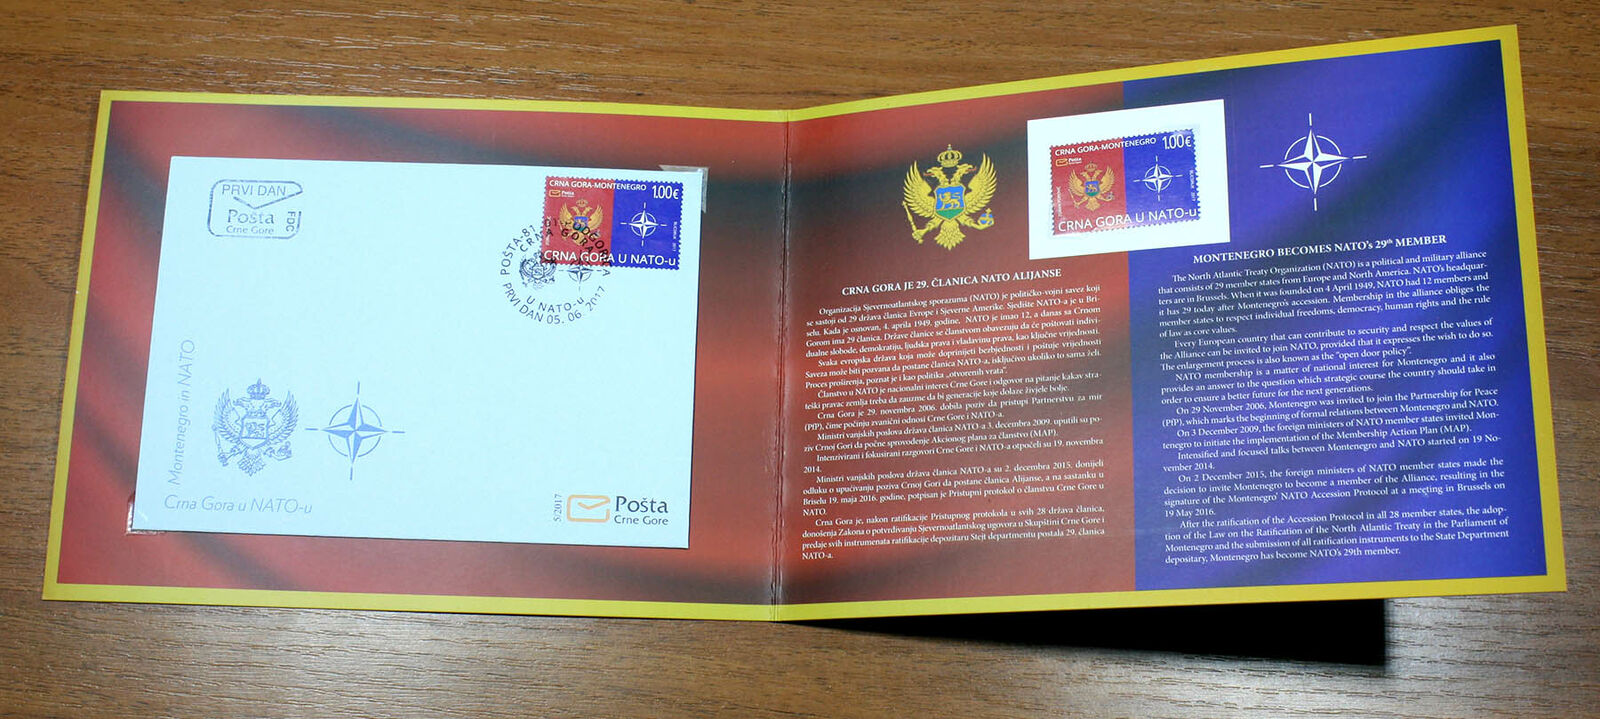 Montenegro - First Day Cover Fdc - Montenegro Ih Nato 2017 With Original Sleeve